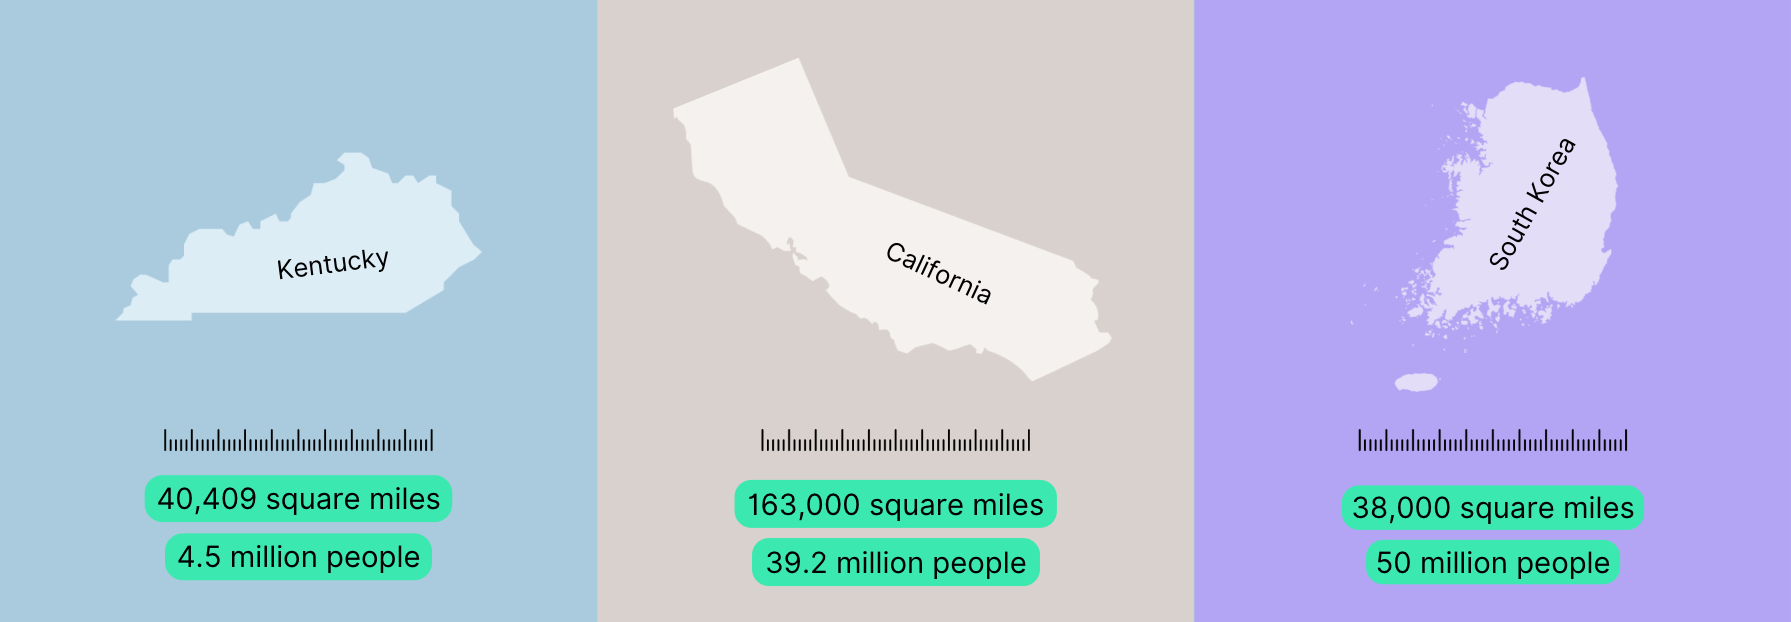 comparison of kentucky, california, and south korea in size and population